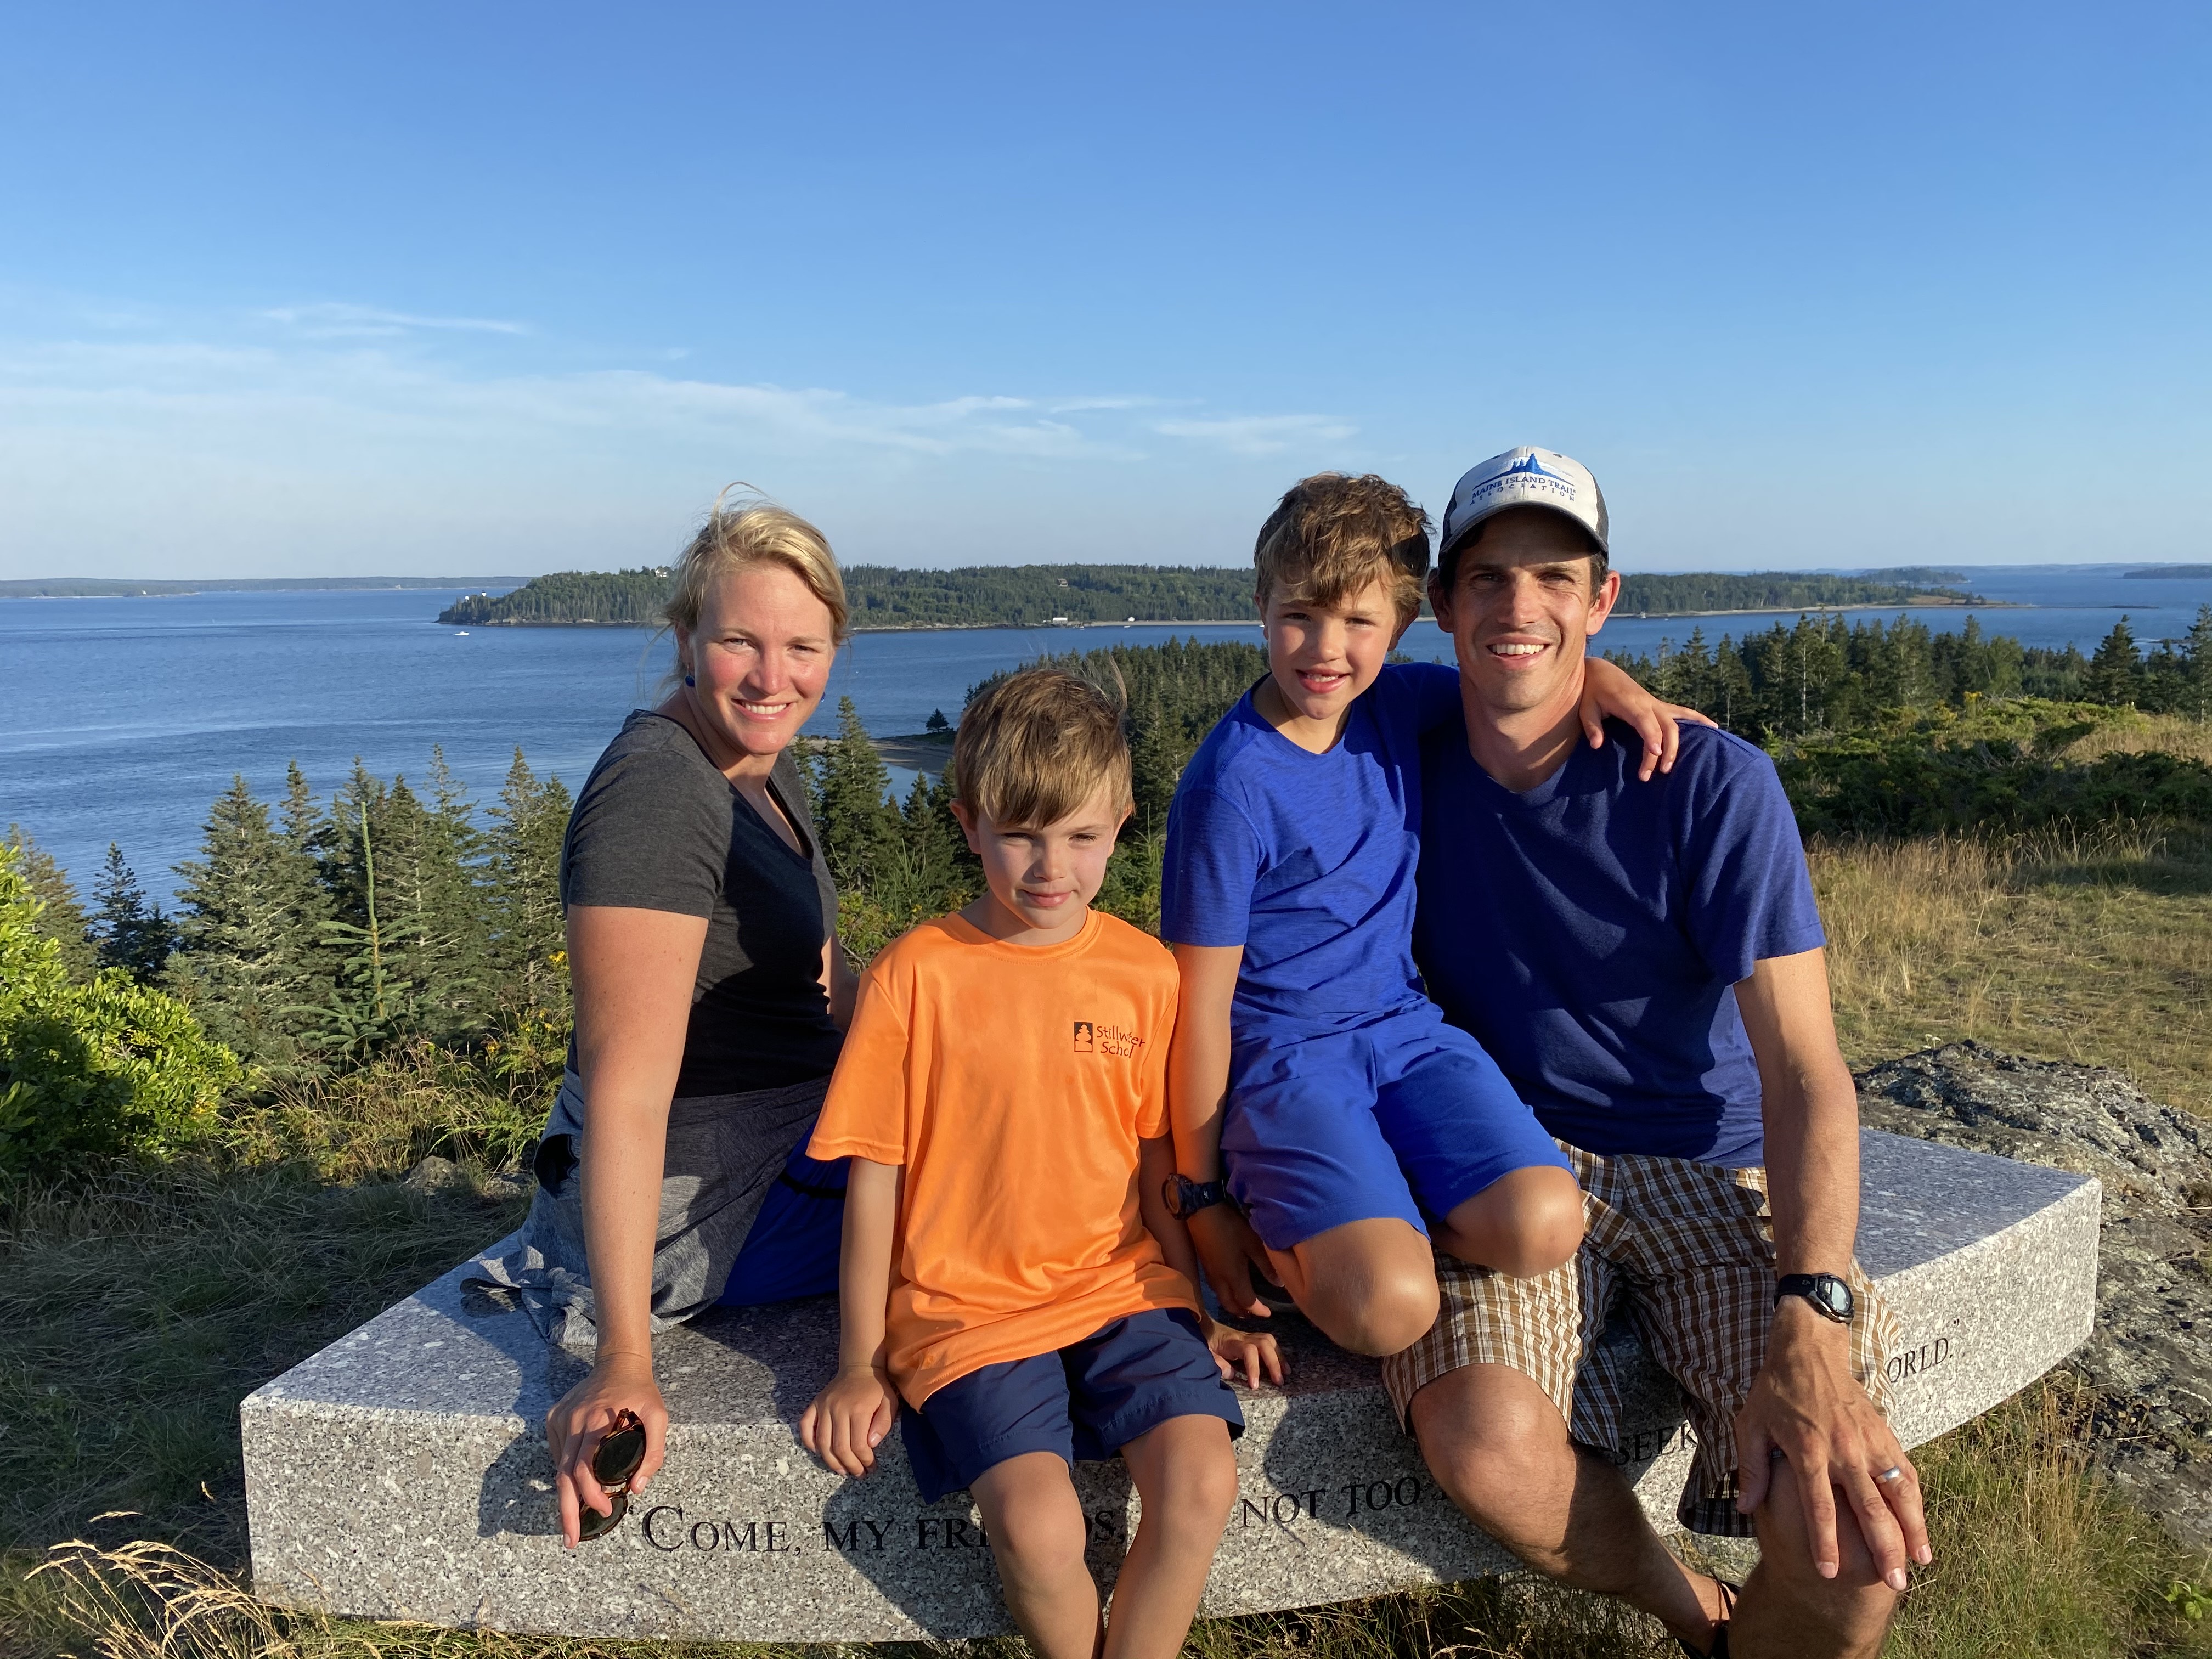 Jordi and his family relaxing in Maine